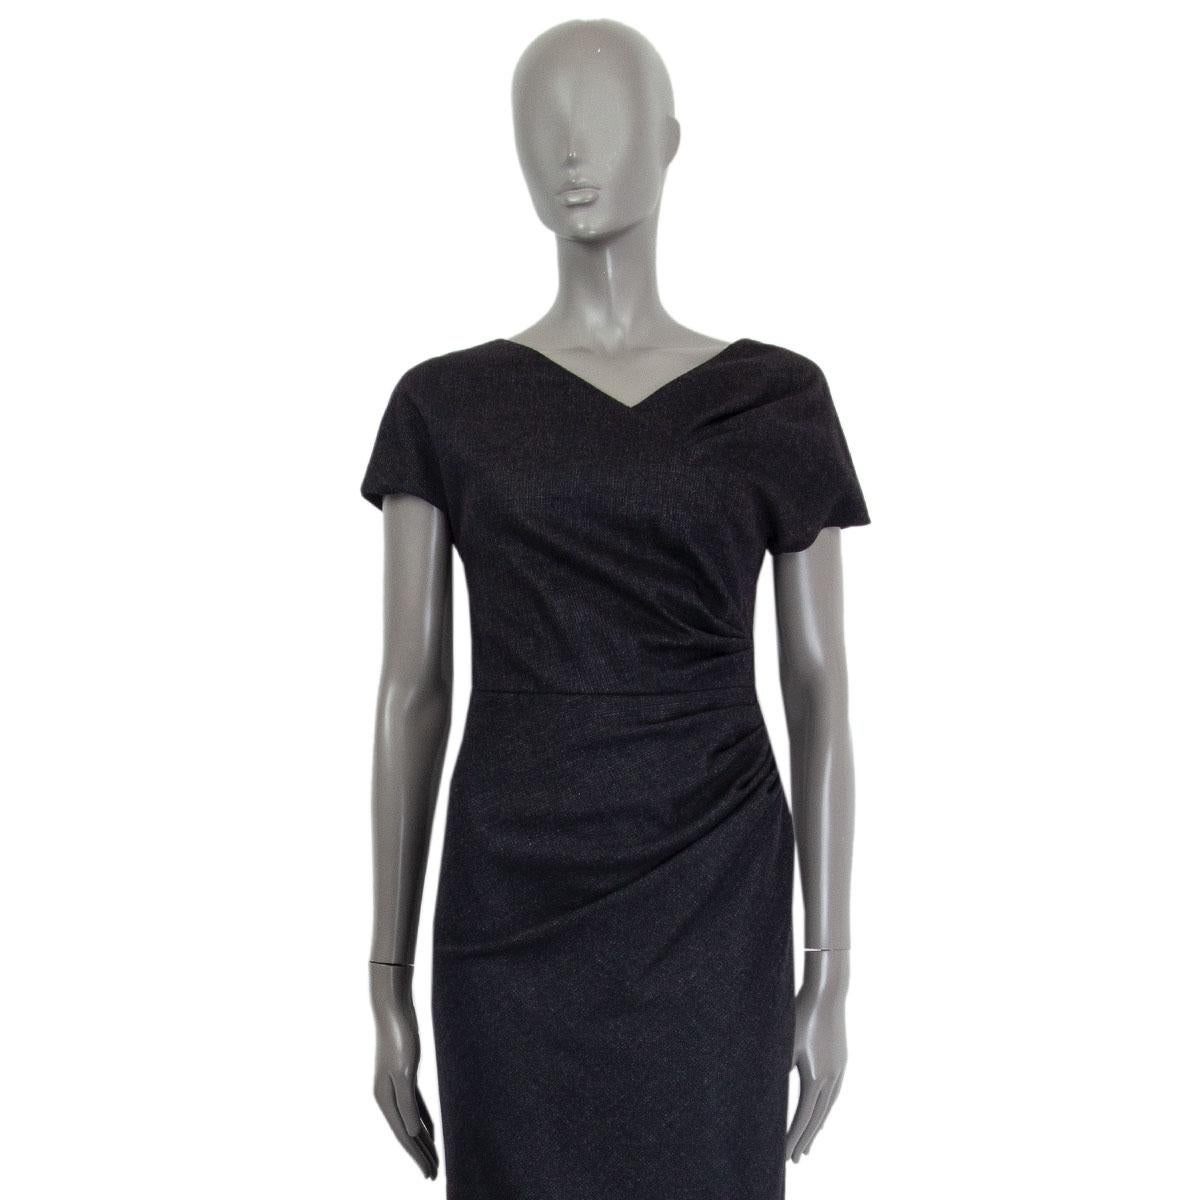 100% authentic Christian Dior short sleeve ruched details sheath dress in dark grey wool (90%), angora (8%) and lycra (2%) with a v-neck. Closes on the back with a concealed zipper. Lined in silk (94%) and lycra (6%). Has been worn and is in